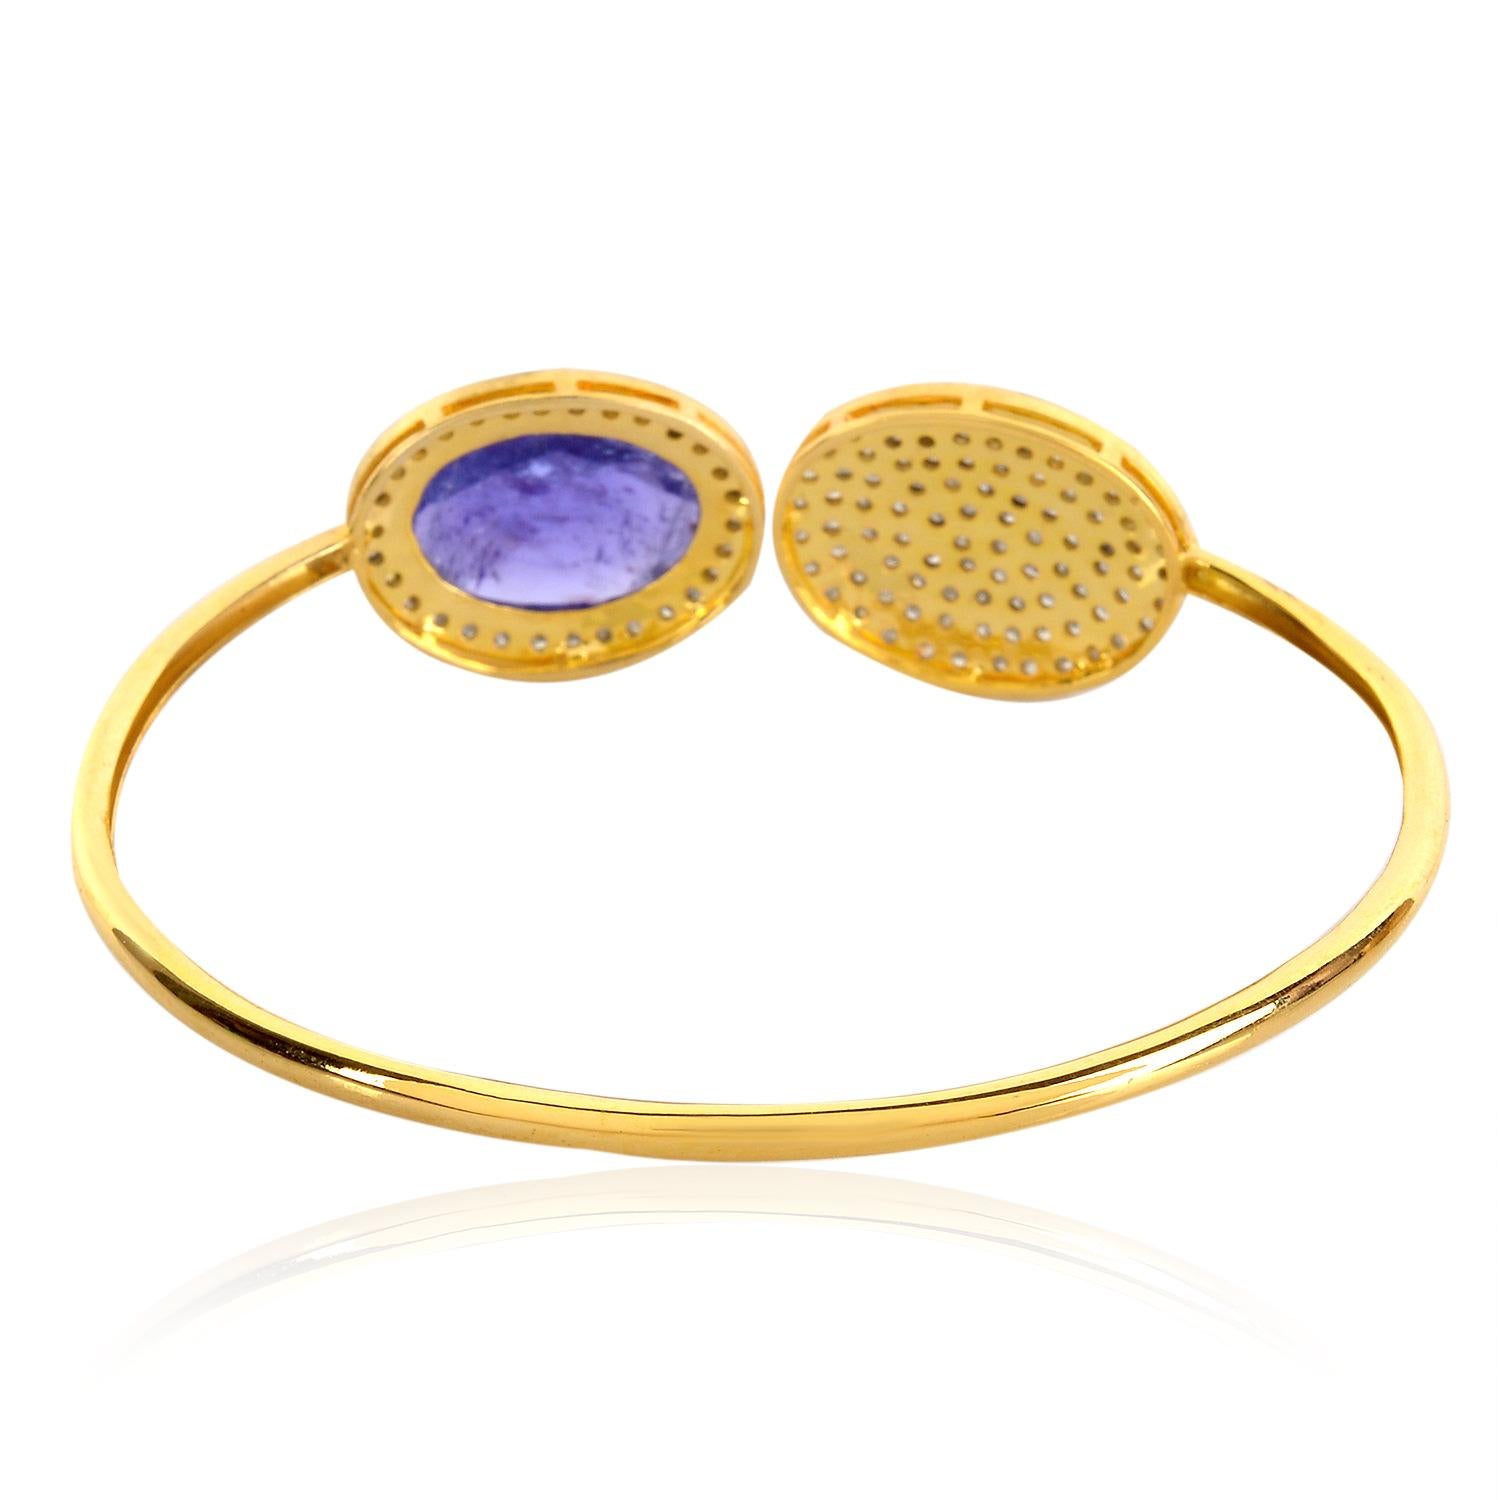 Mixed Cut Tanzanite & Pave Diamond Adjustable Cuff Made In 18k Gold & Silver For Sale